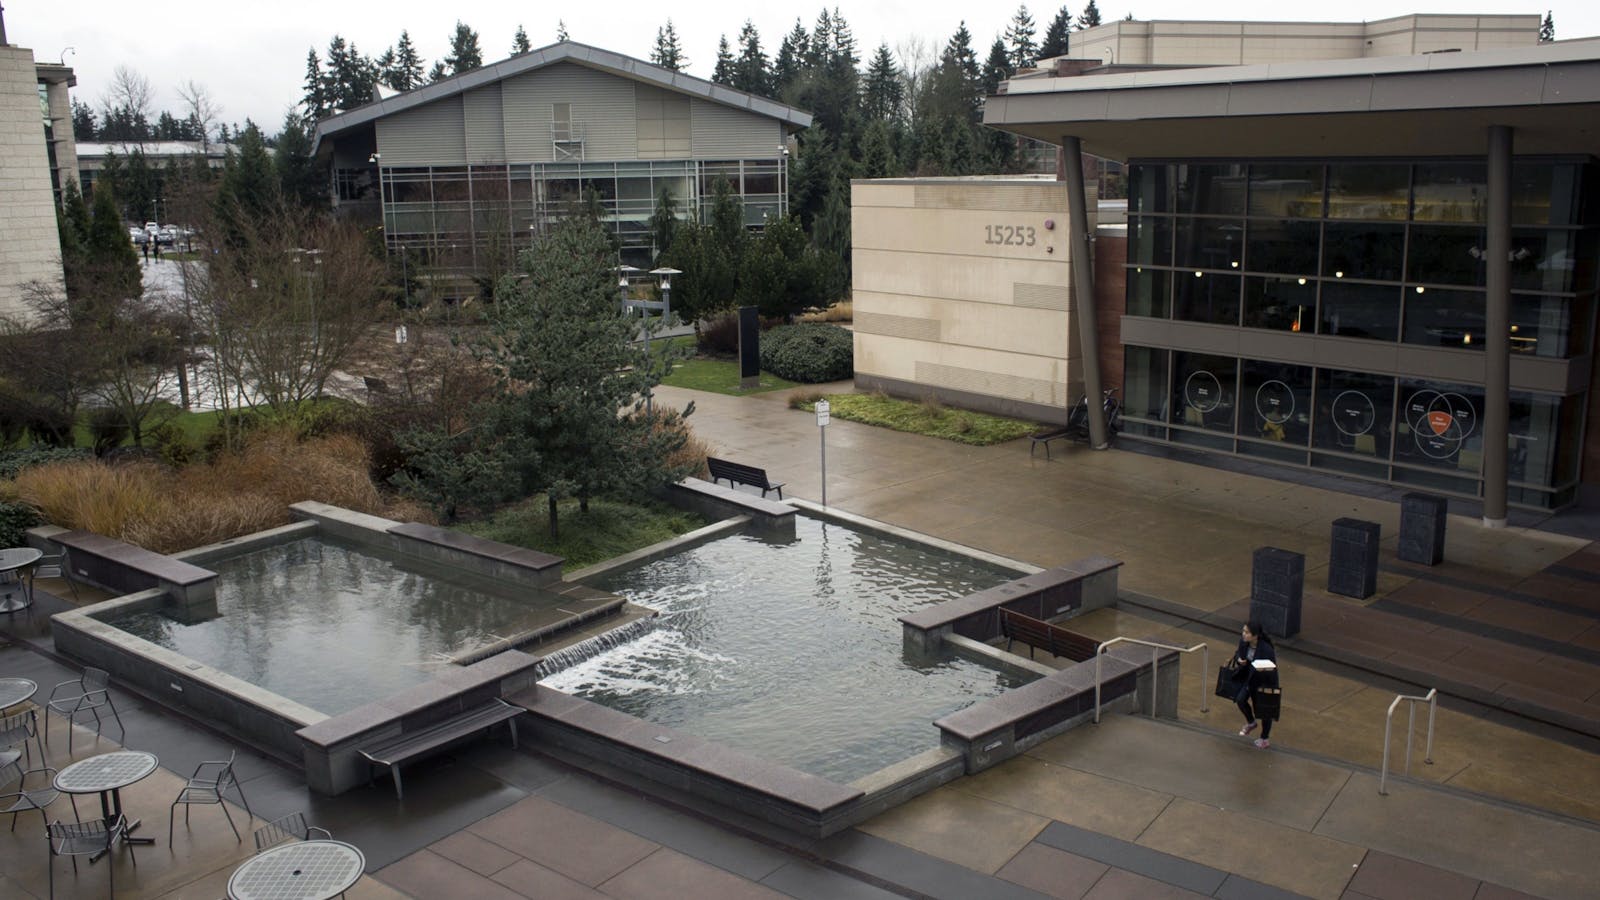 Microsoft's main campus in 2017. Photo by Bloomberg